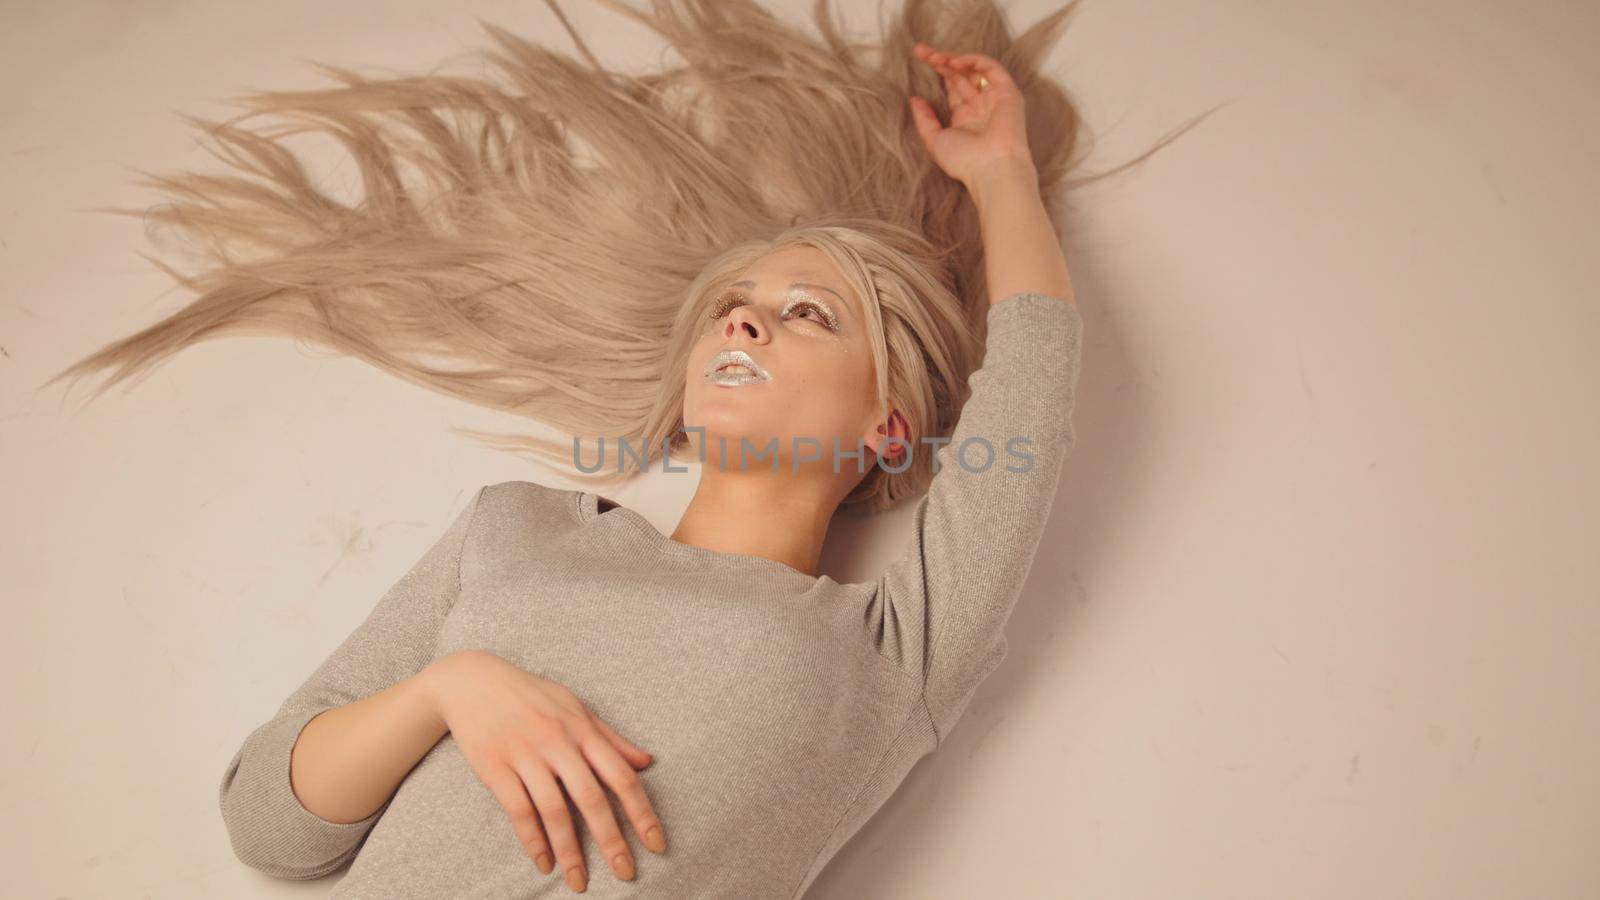 Blonde model girl lying in photo studio - close up view, white background